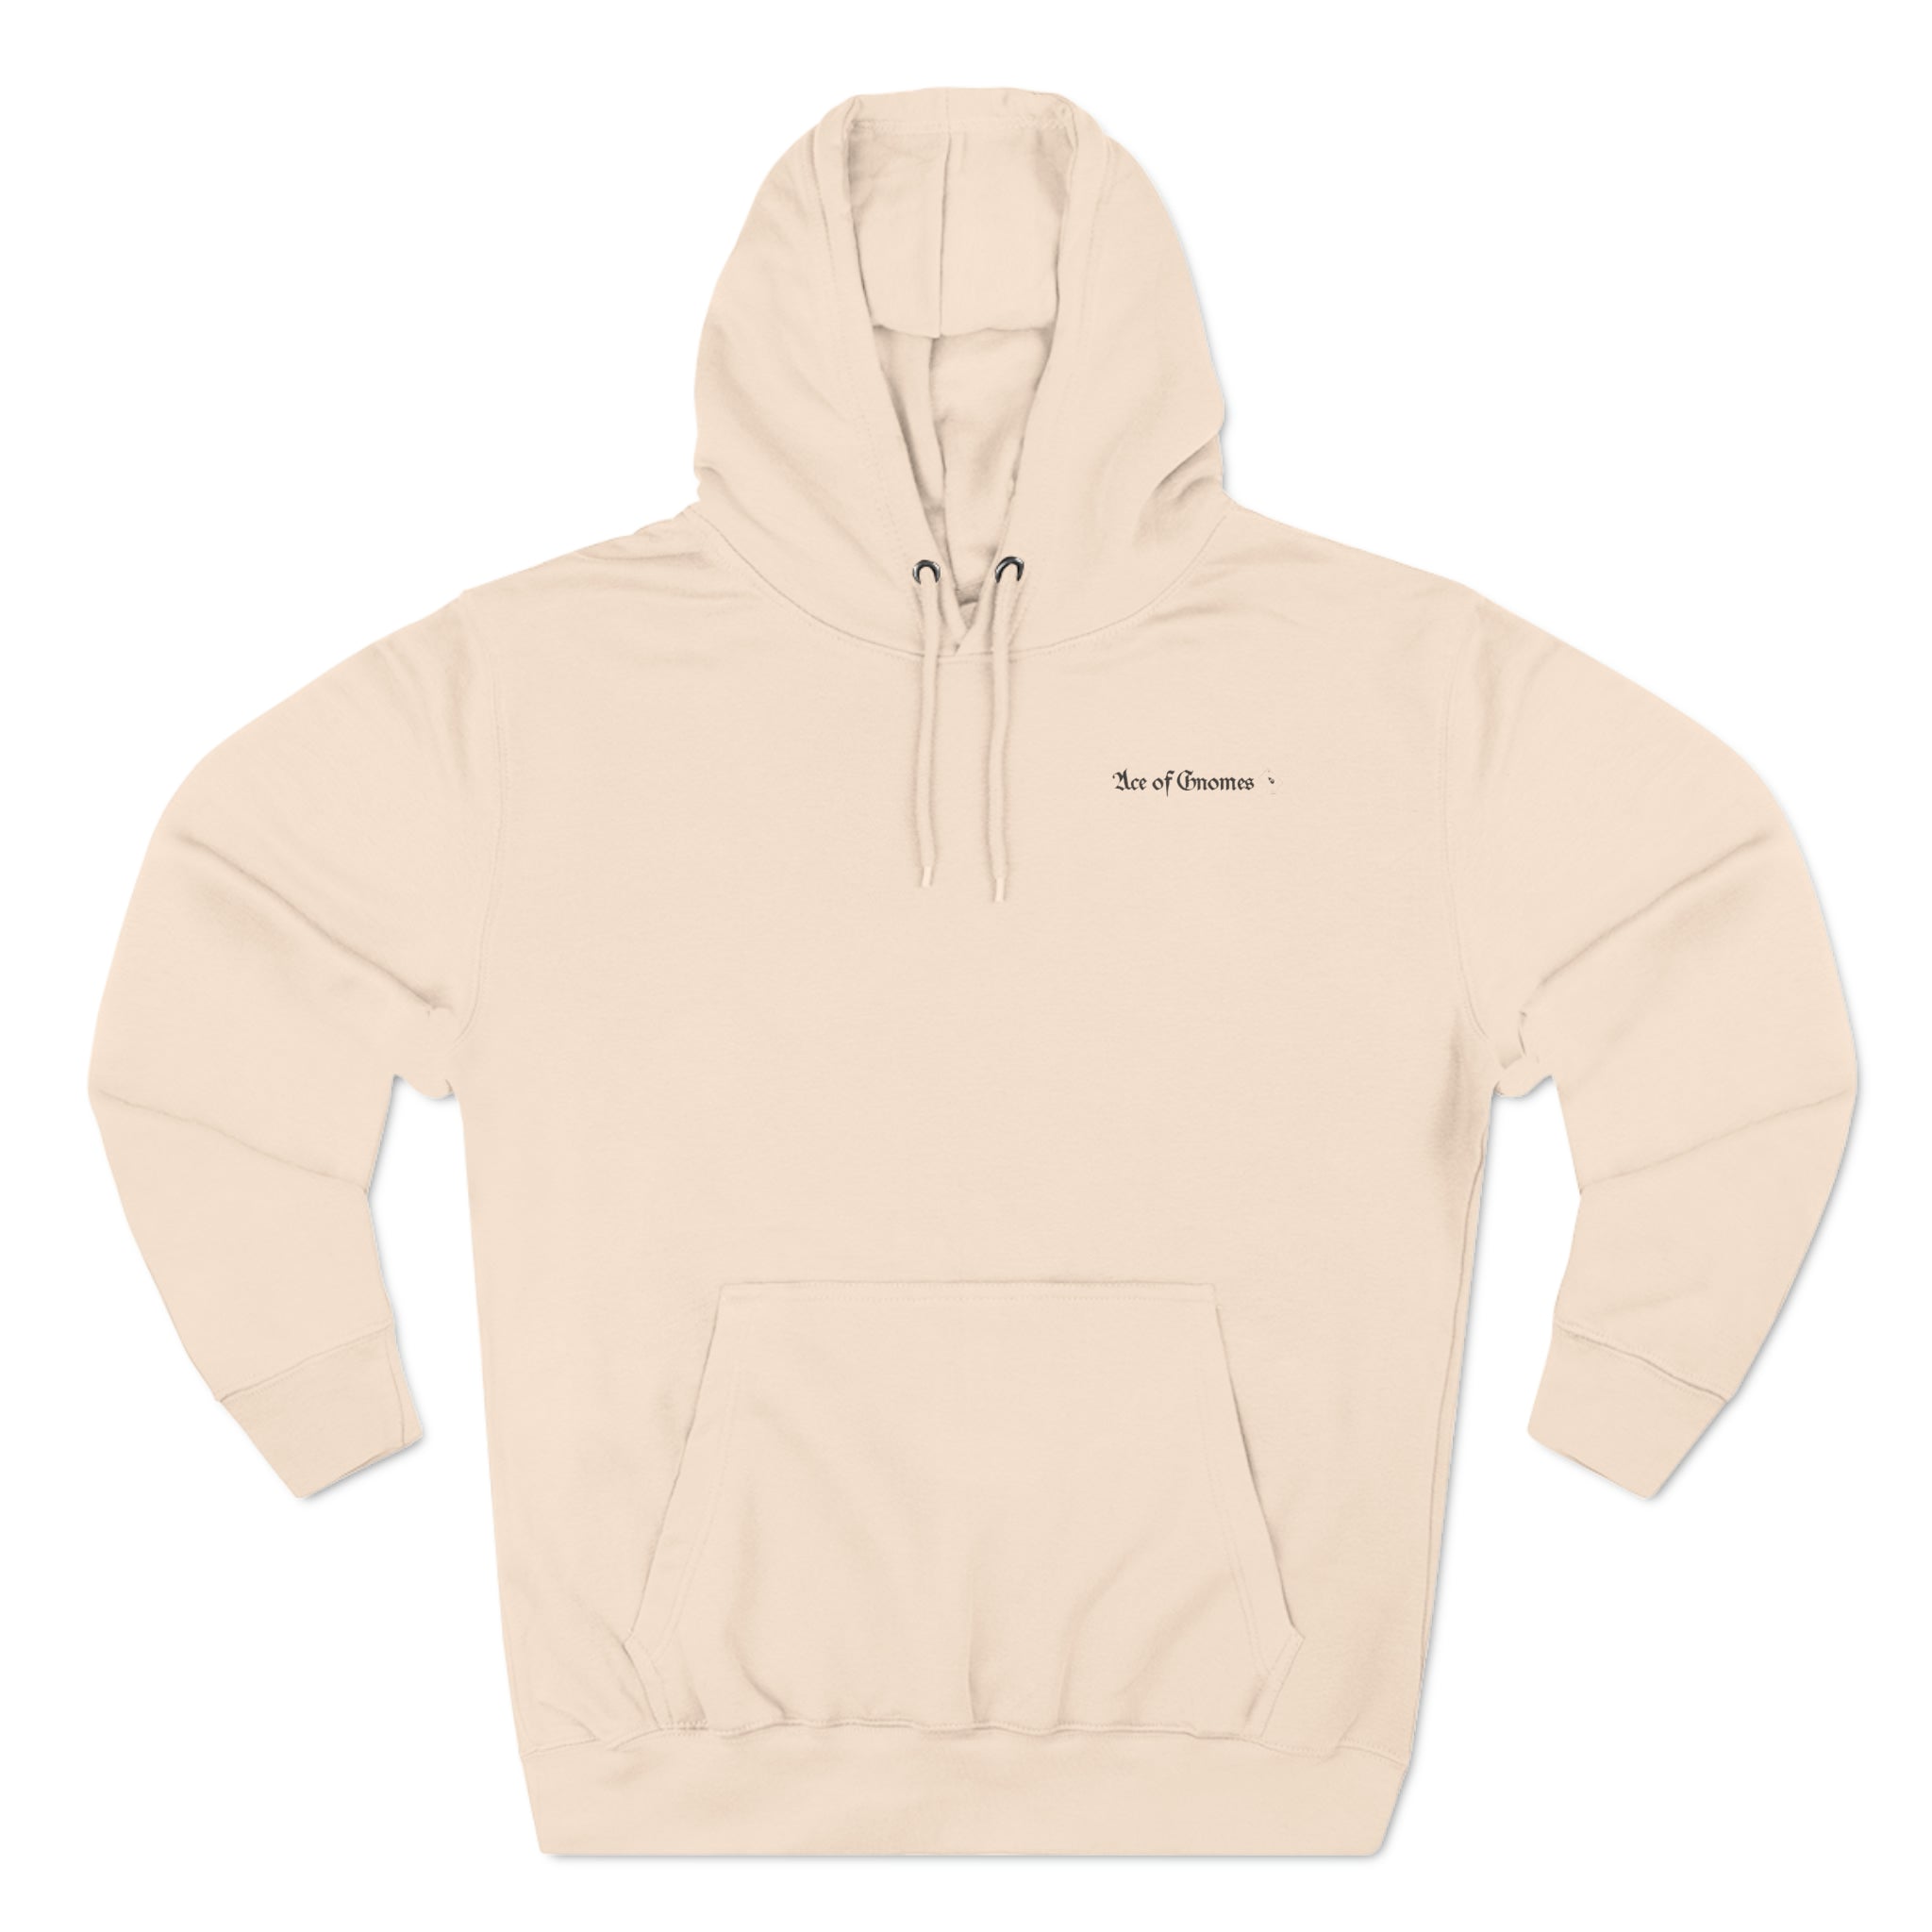 Goodberry | Premium Pullover Hoodie - Hoodie - Ace of Gnomes - 33927750618537563576